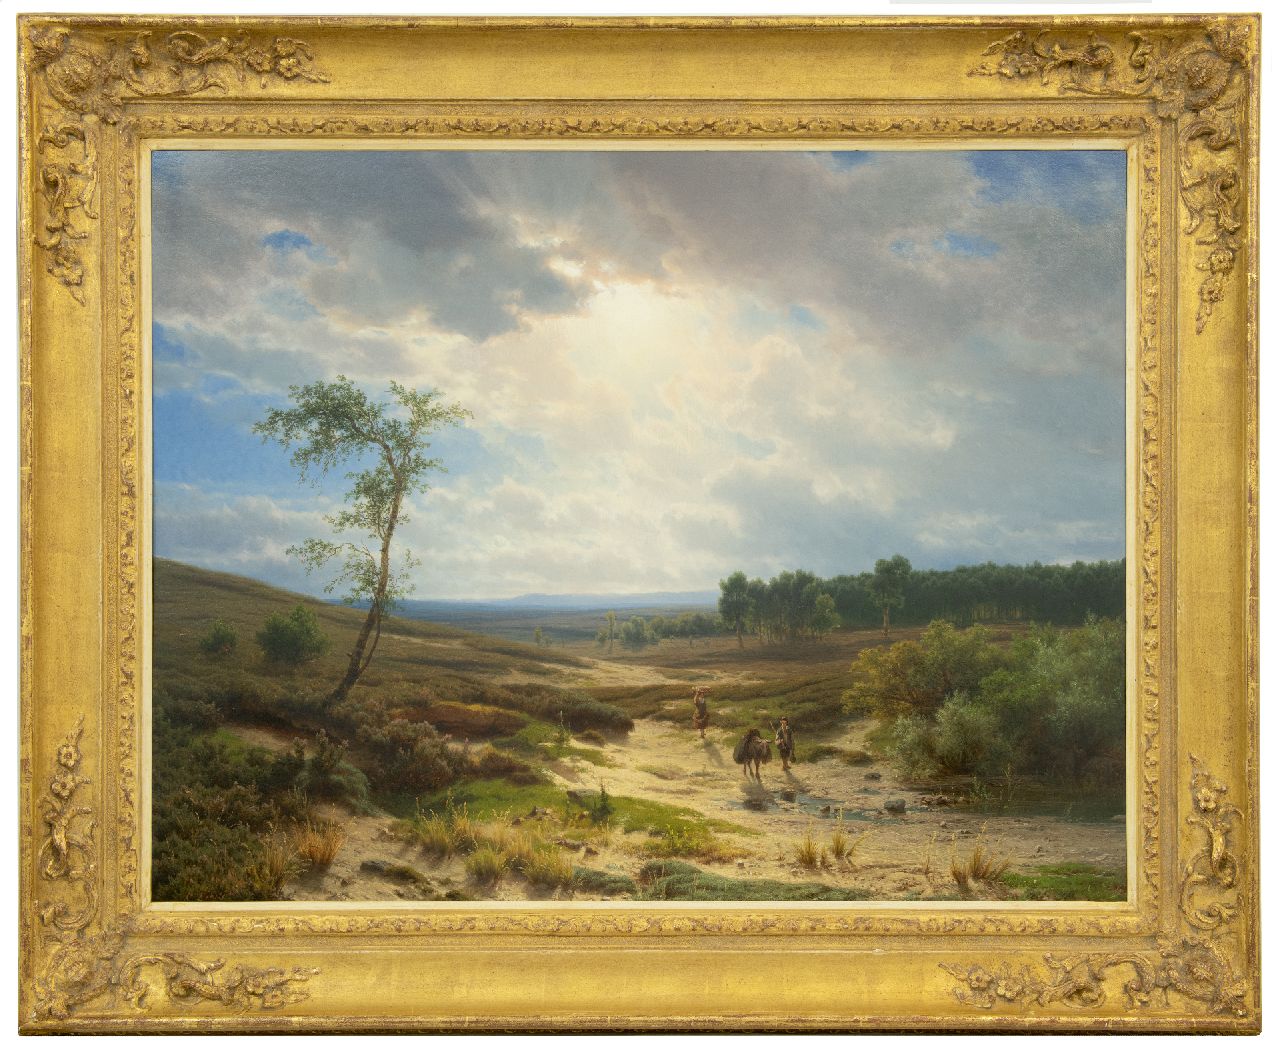 Lieste C.  | Cornelis Lieste | Paintings offered for sale | Heathland near Oosterbeek, oil on panel 70.9 x 95.2 cm, signed l.l. and painted ca. 1855